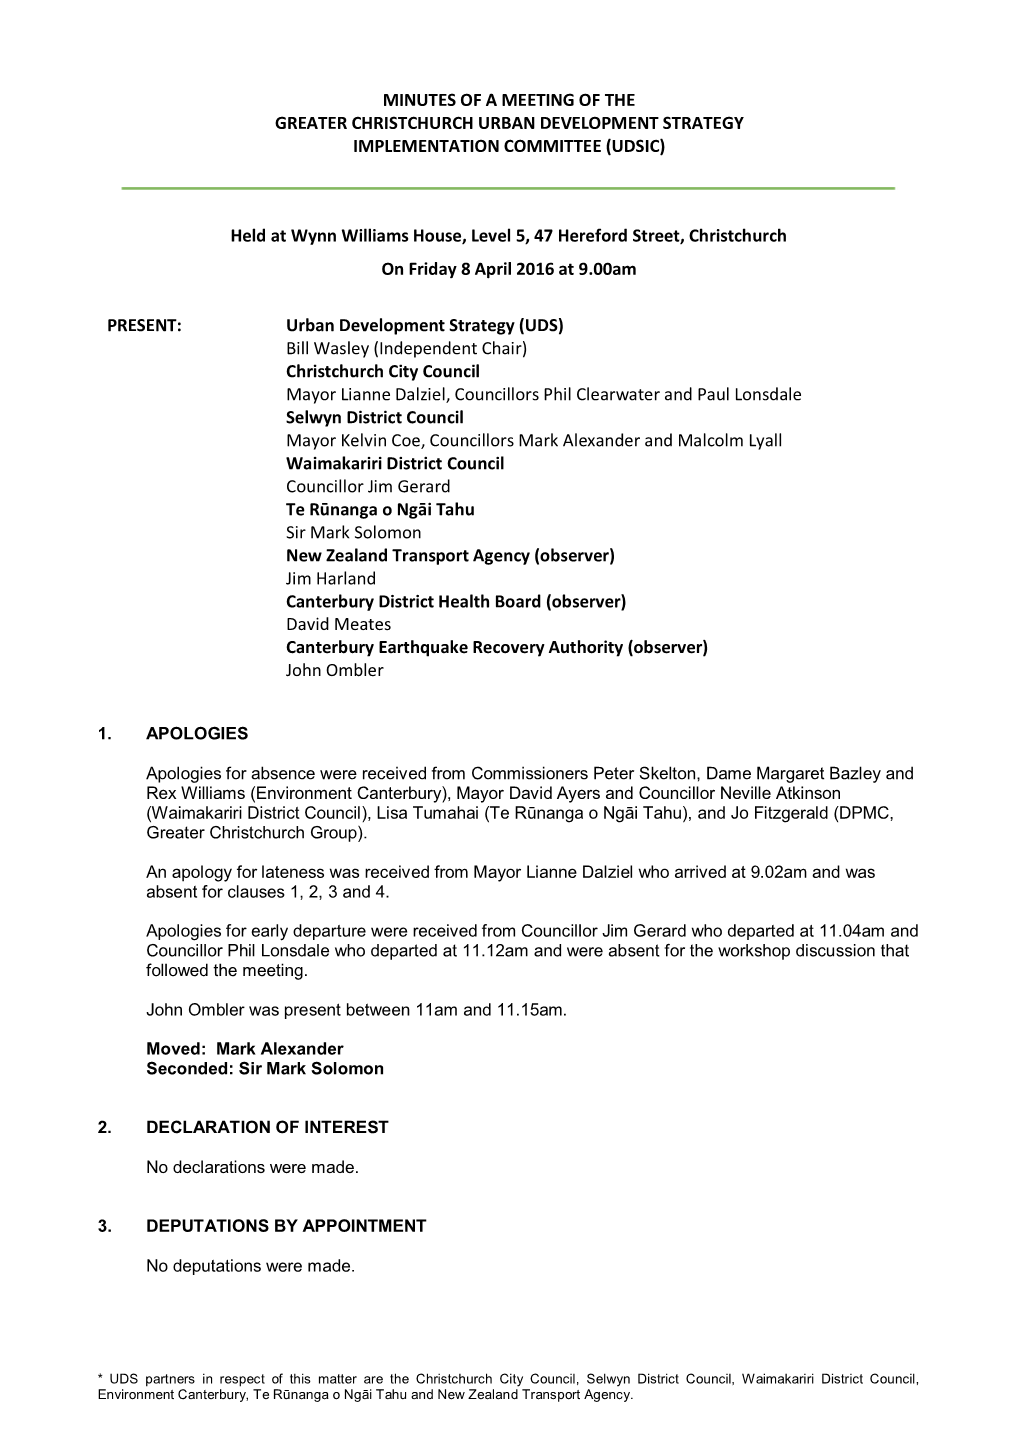 Minutes of a Meeting of the Greater Christchurch Urban Development Strategy Implementation Committee (Udsic)